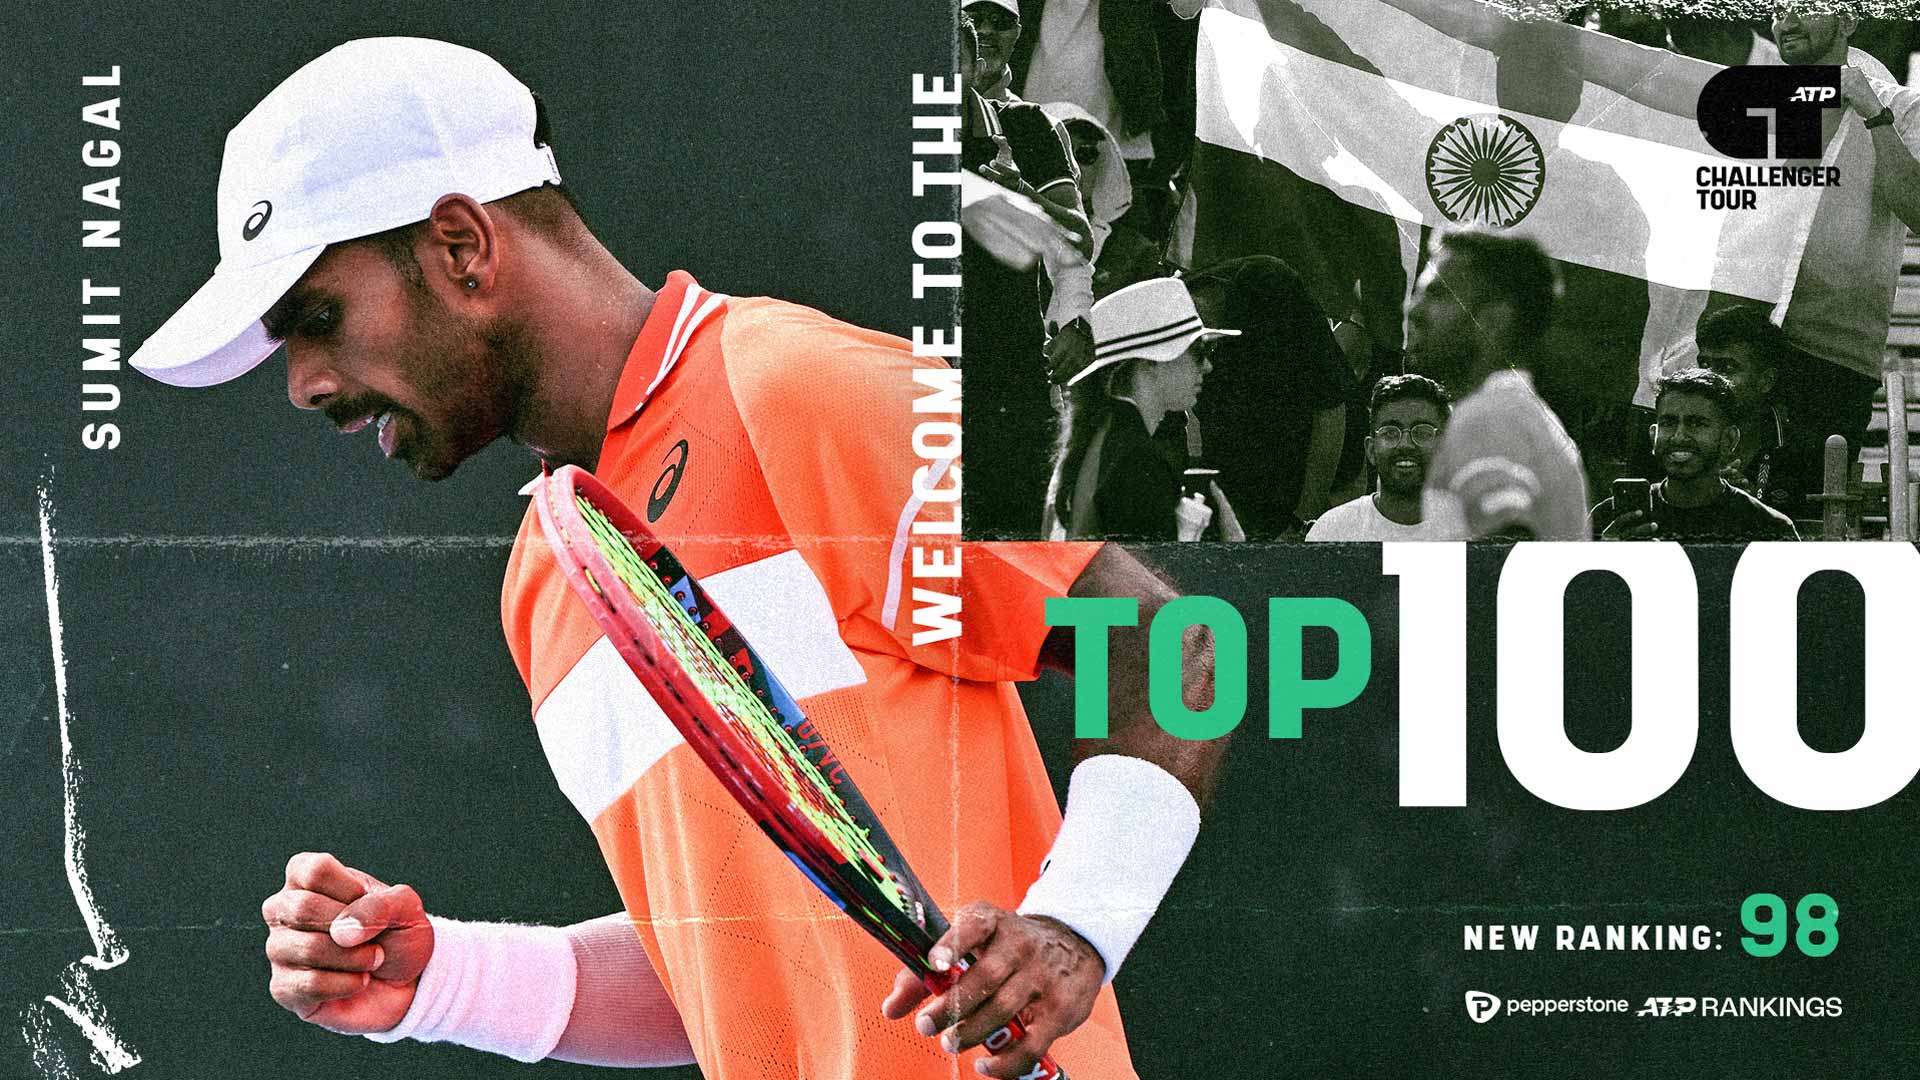 Sumit Nagal is the 10th Indian to crack the Top 100 of the Pepperstone ATP Rankings.